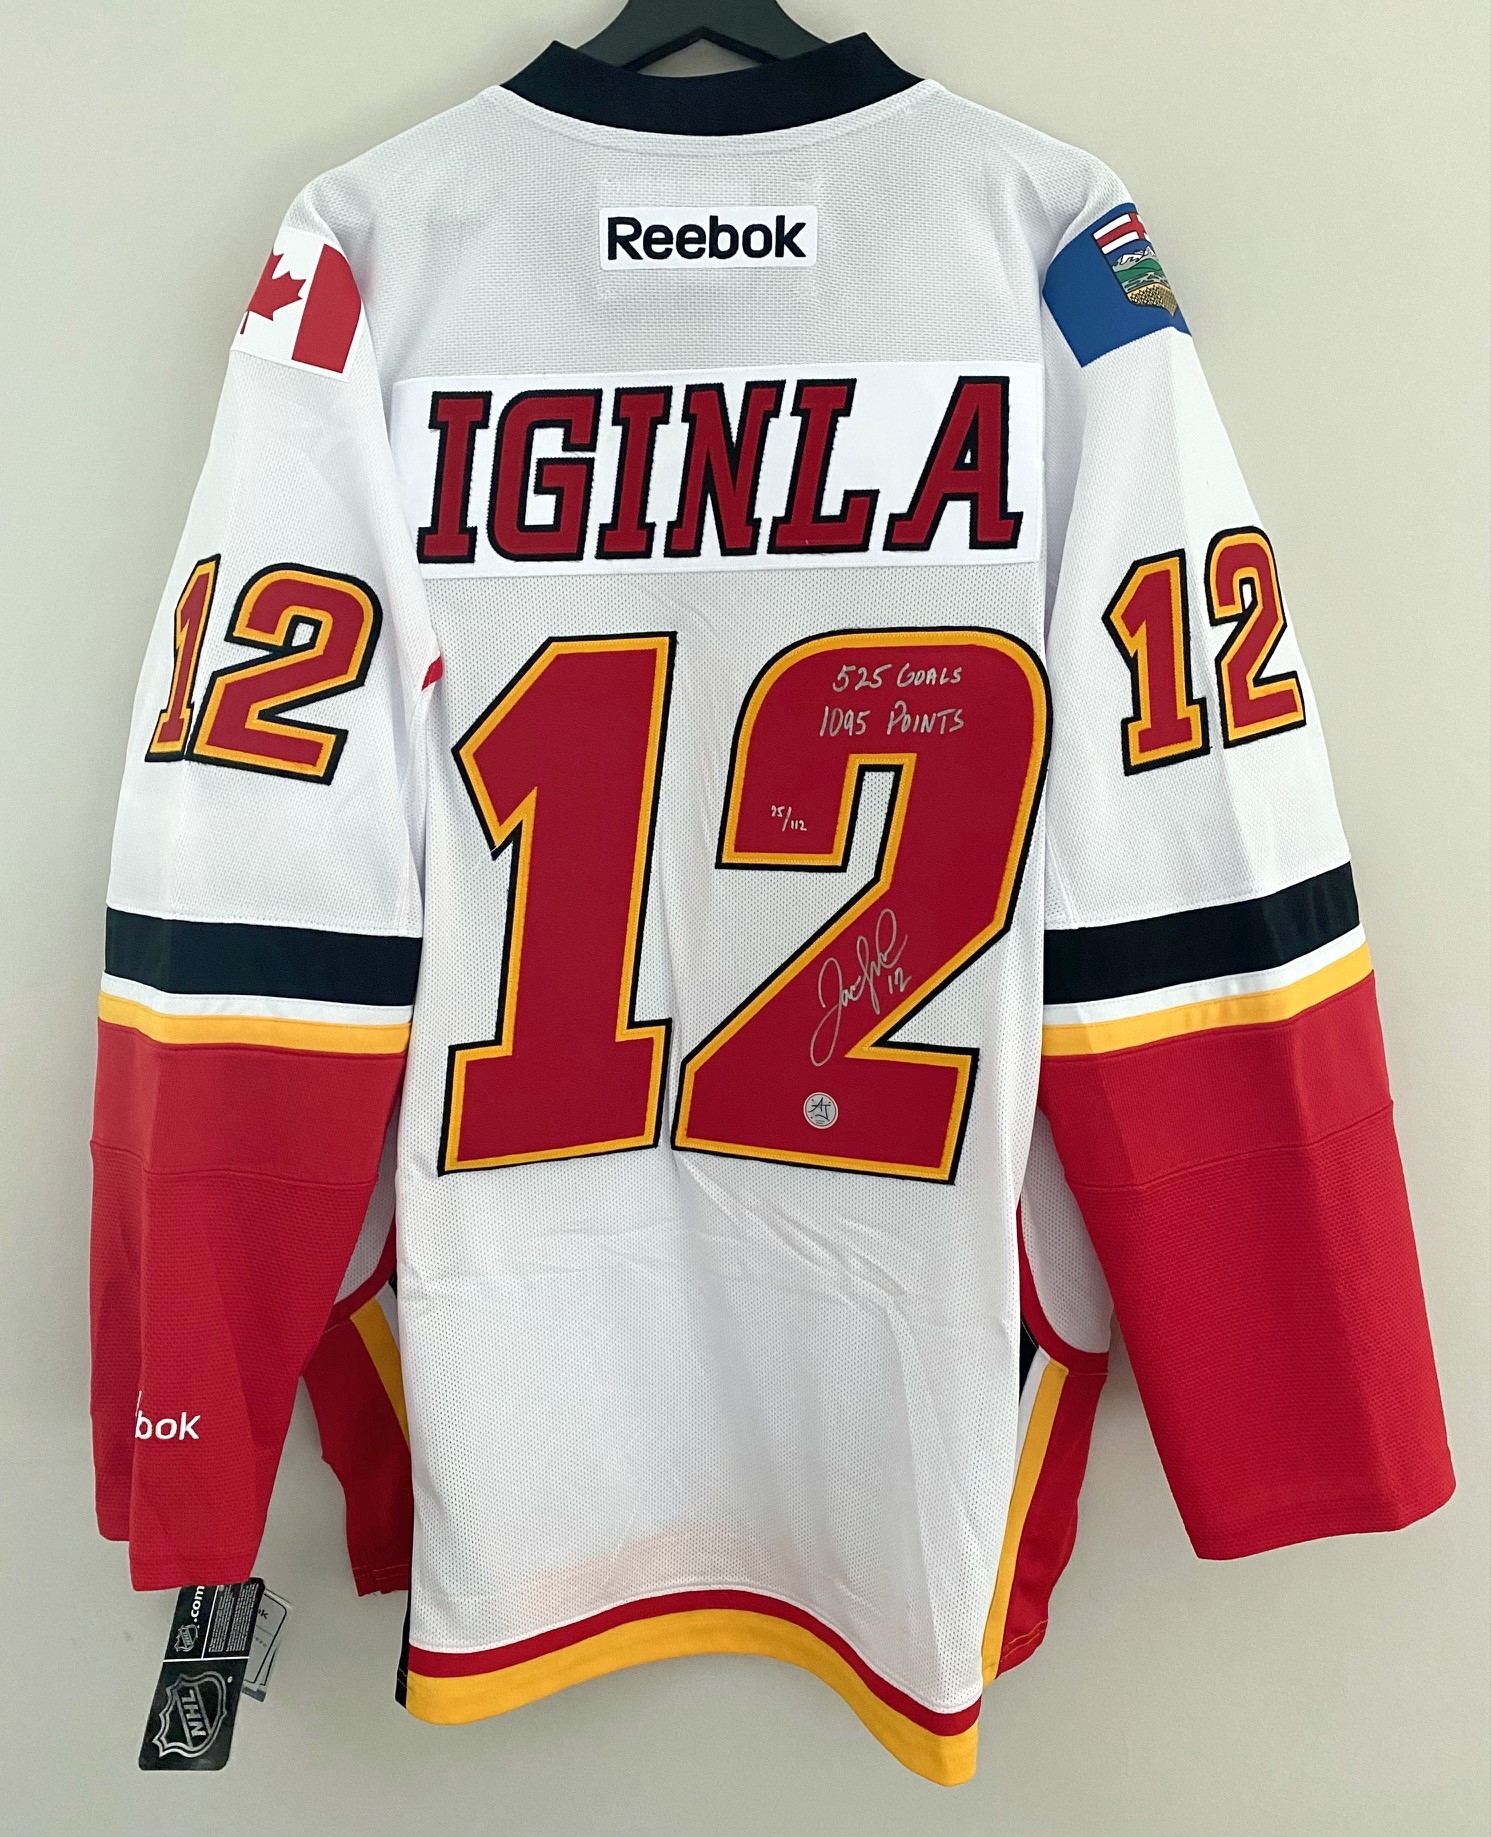 Jarome Iginla Calgary Flames Signed Reebok Jersey with 525 Goal 1095 Points Note #75/112